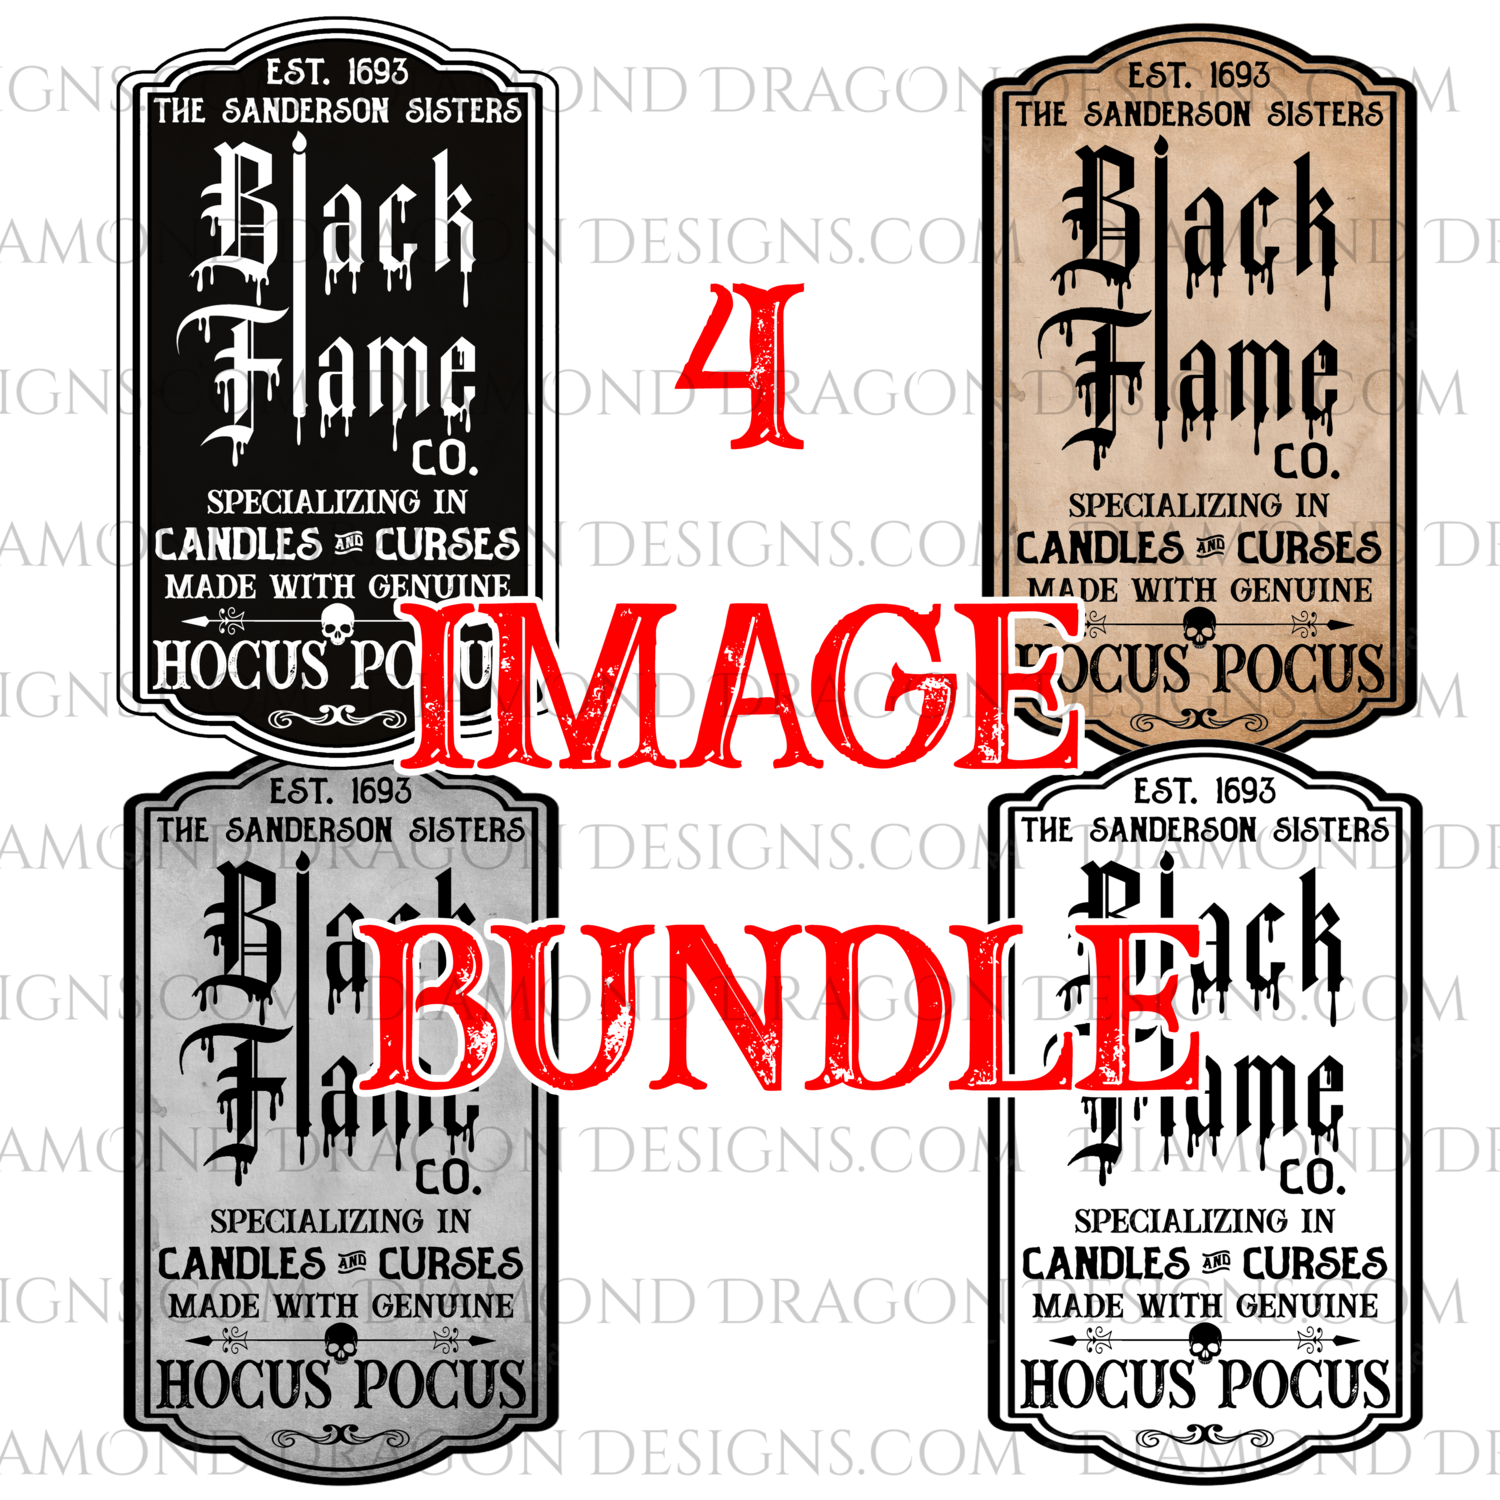 Halloween - All 4 Black Flame Candle Labels for Tumblers, Image File, Instant Digital Image